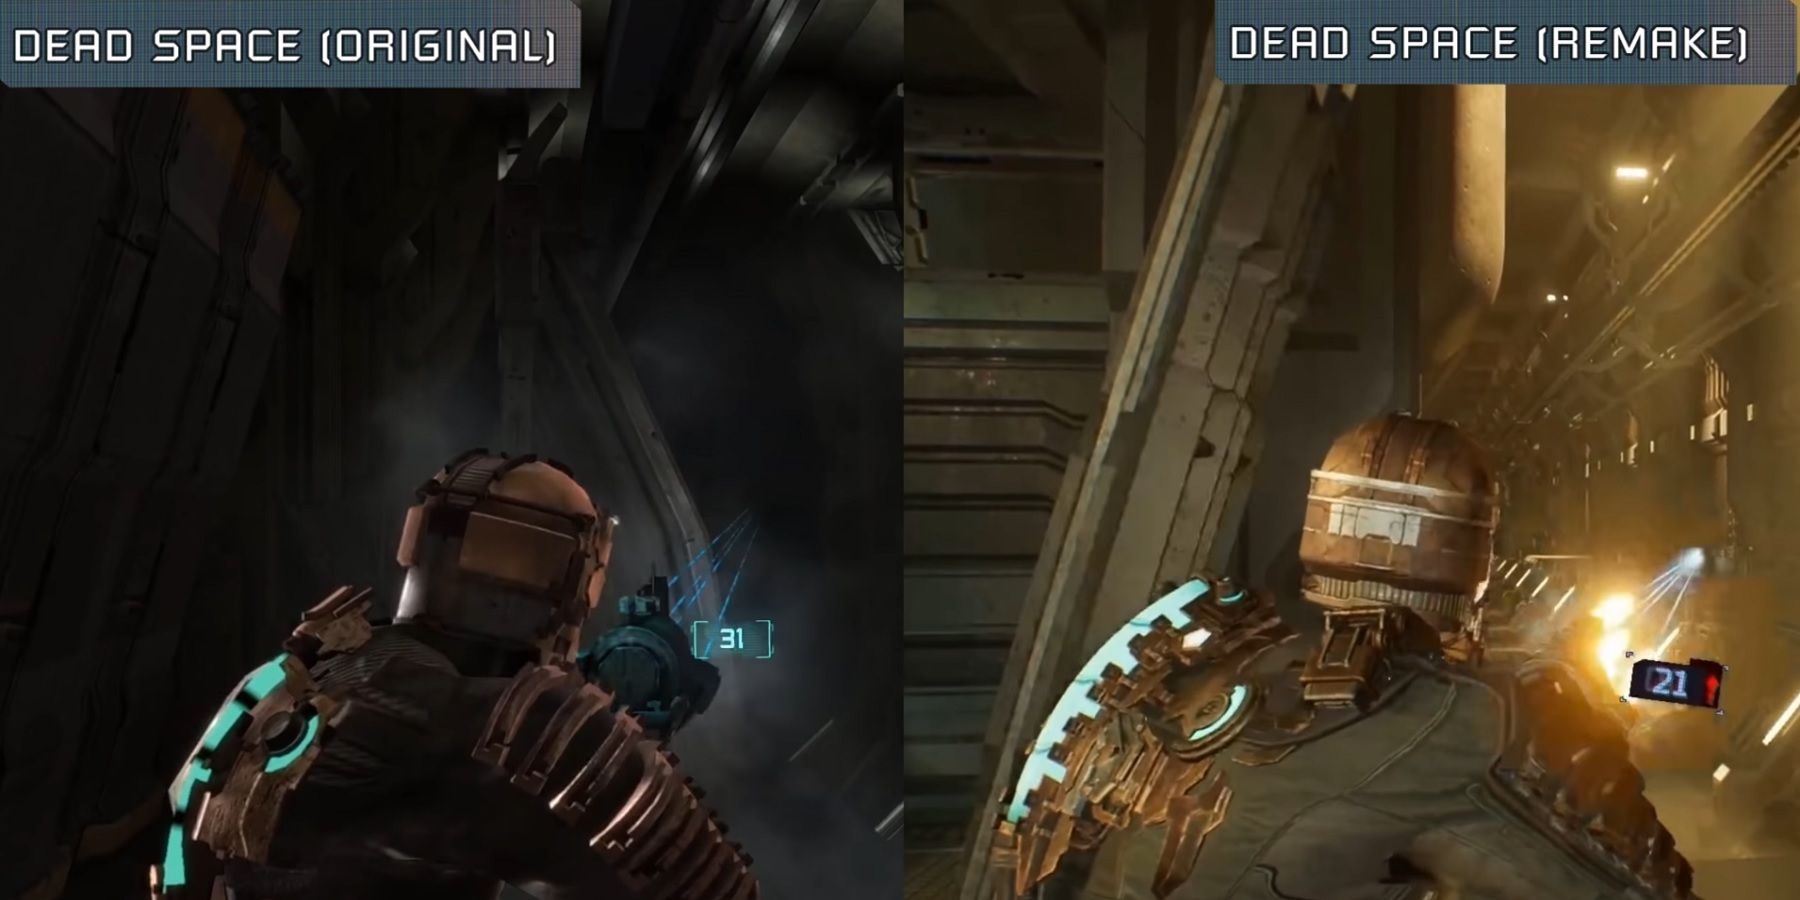 Spliced image showing the original Dead Space on the left and the remake on the right.